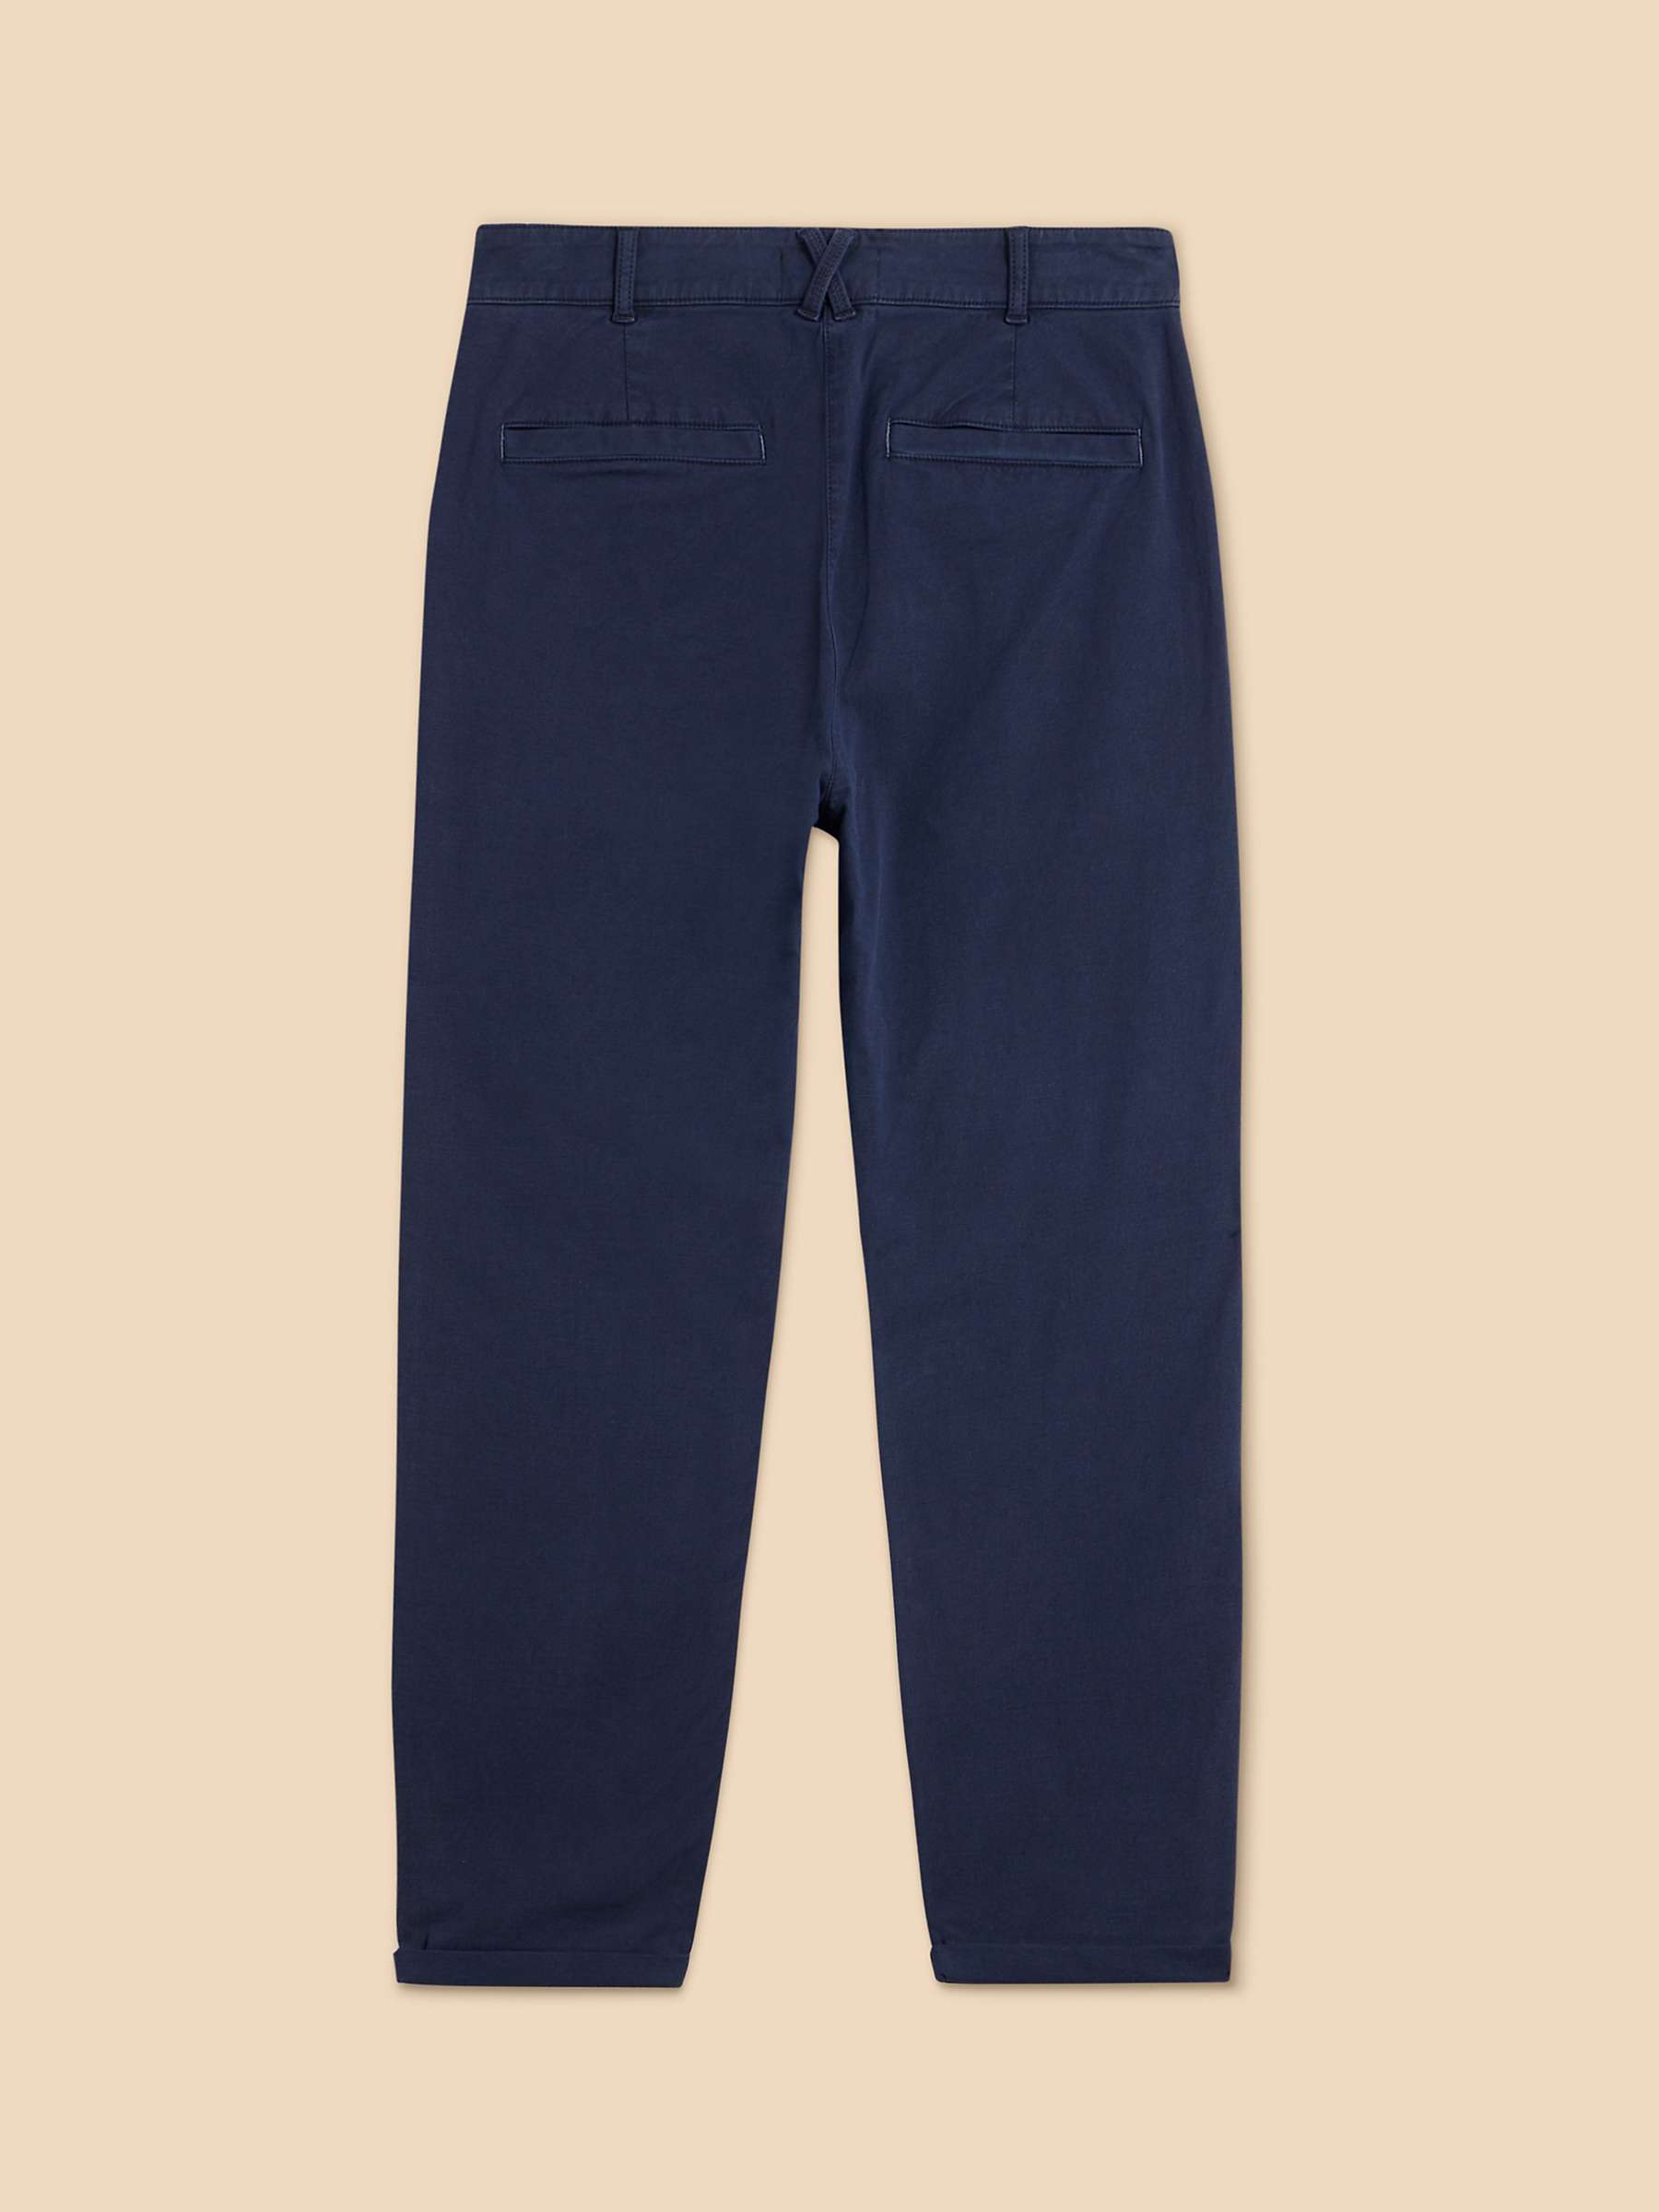 Buy White Stuff Linen Blend Twister Chino Trousers Online at johnlewis.com